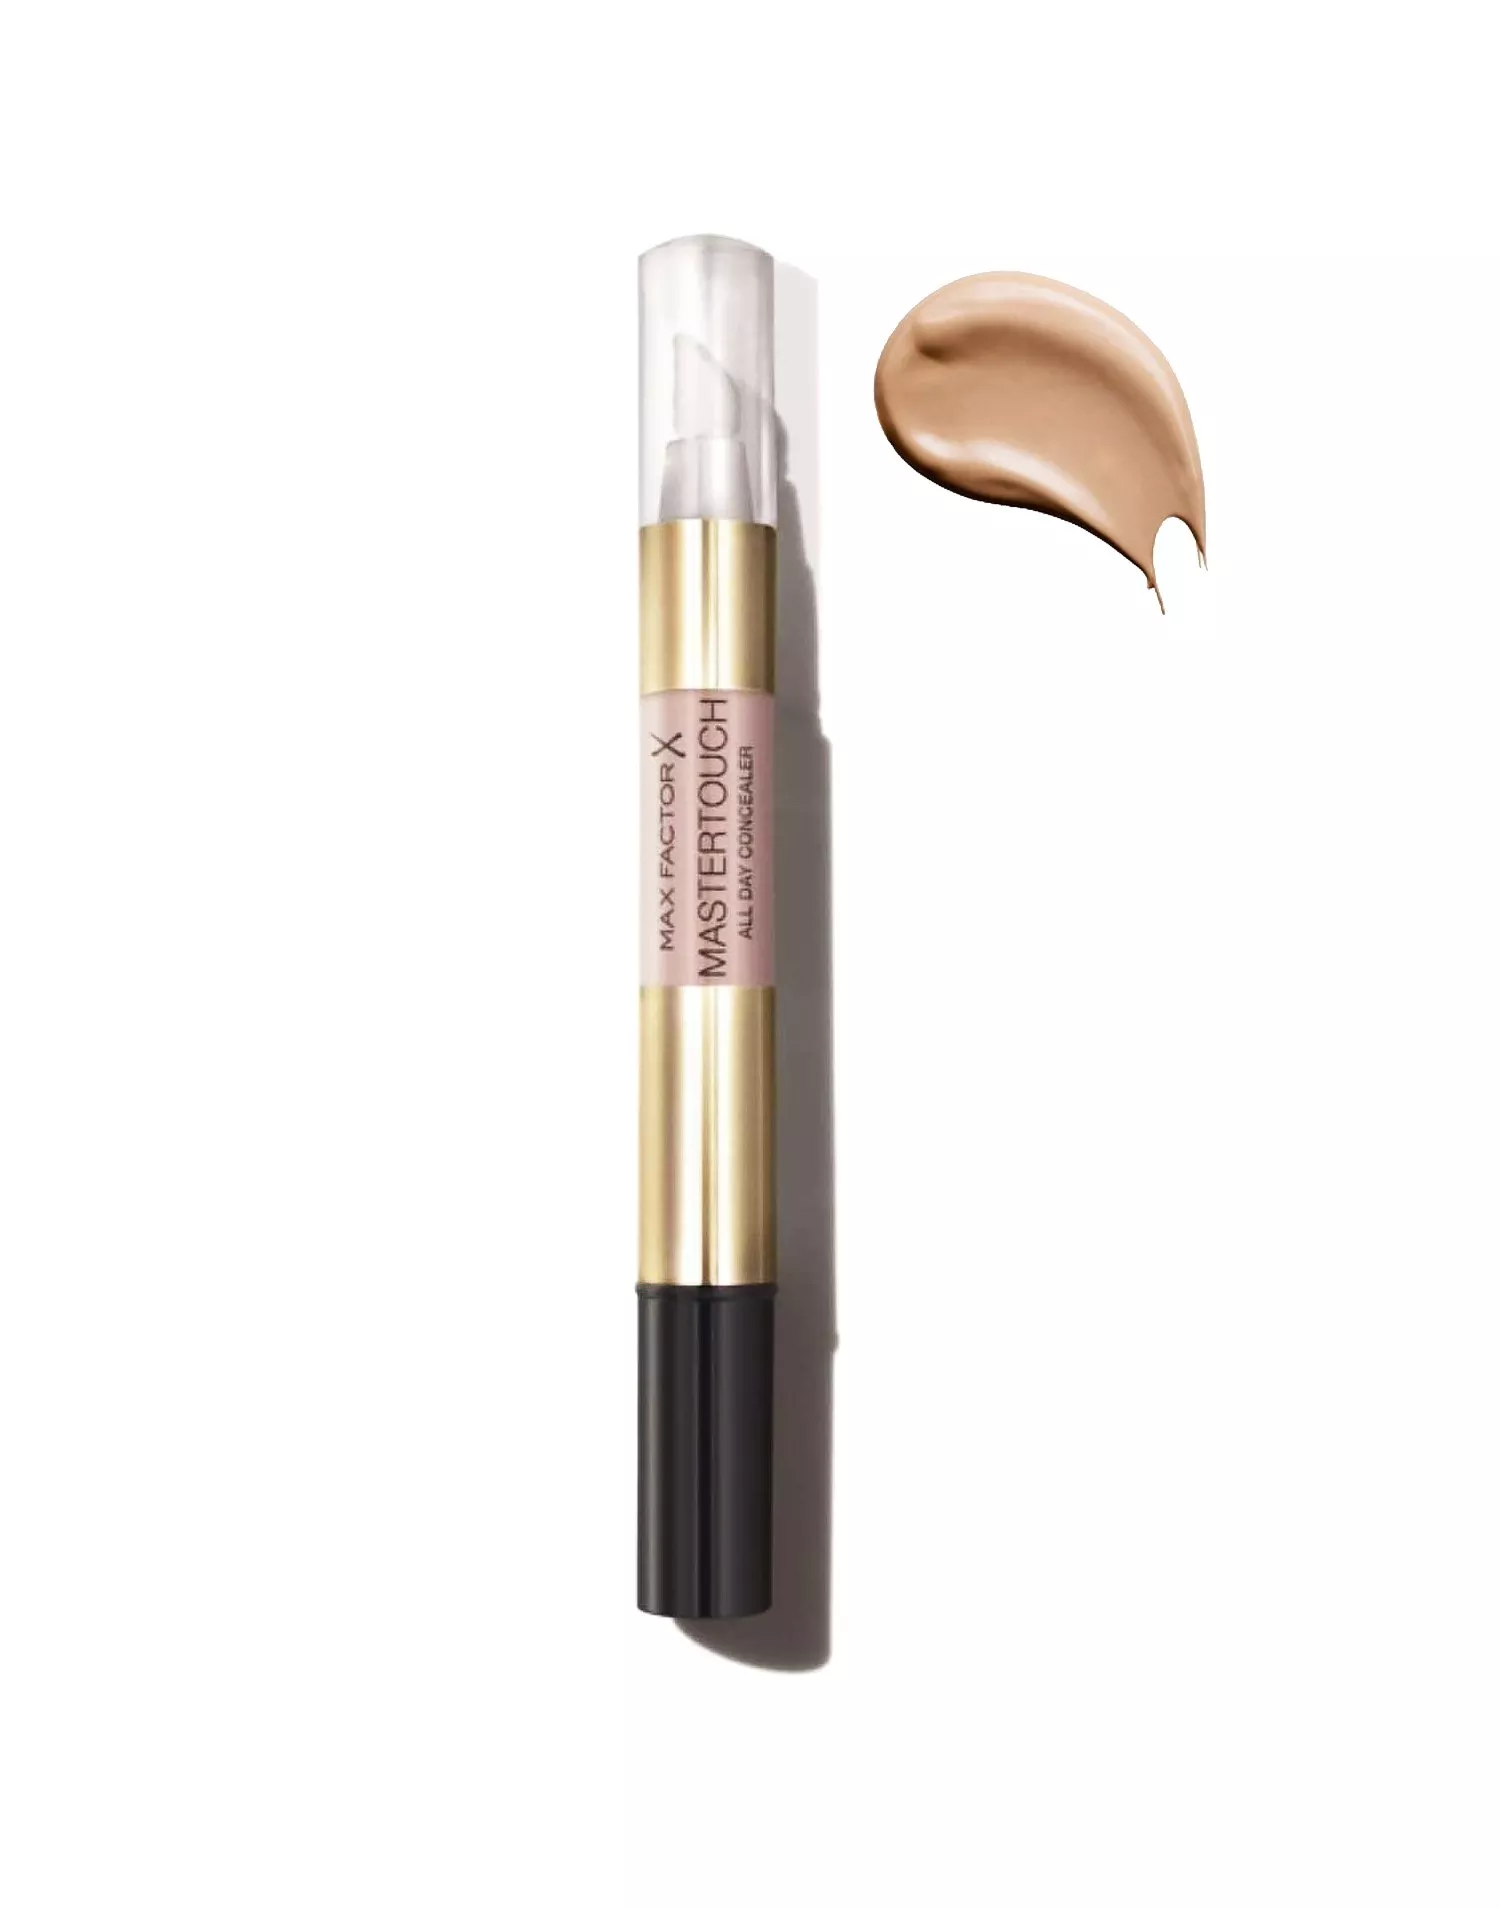 Buy Max Factor Mastertouch Fair | Nelly.com